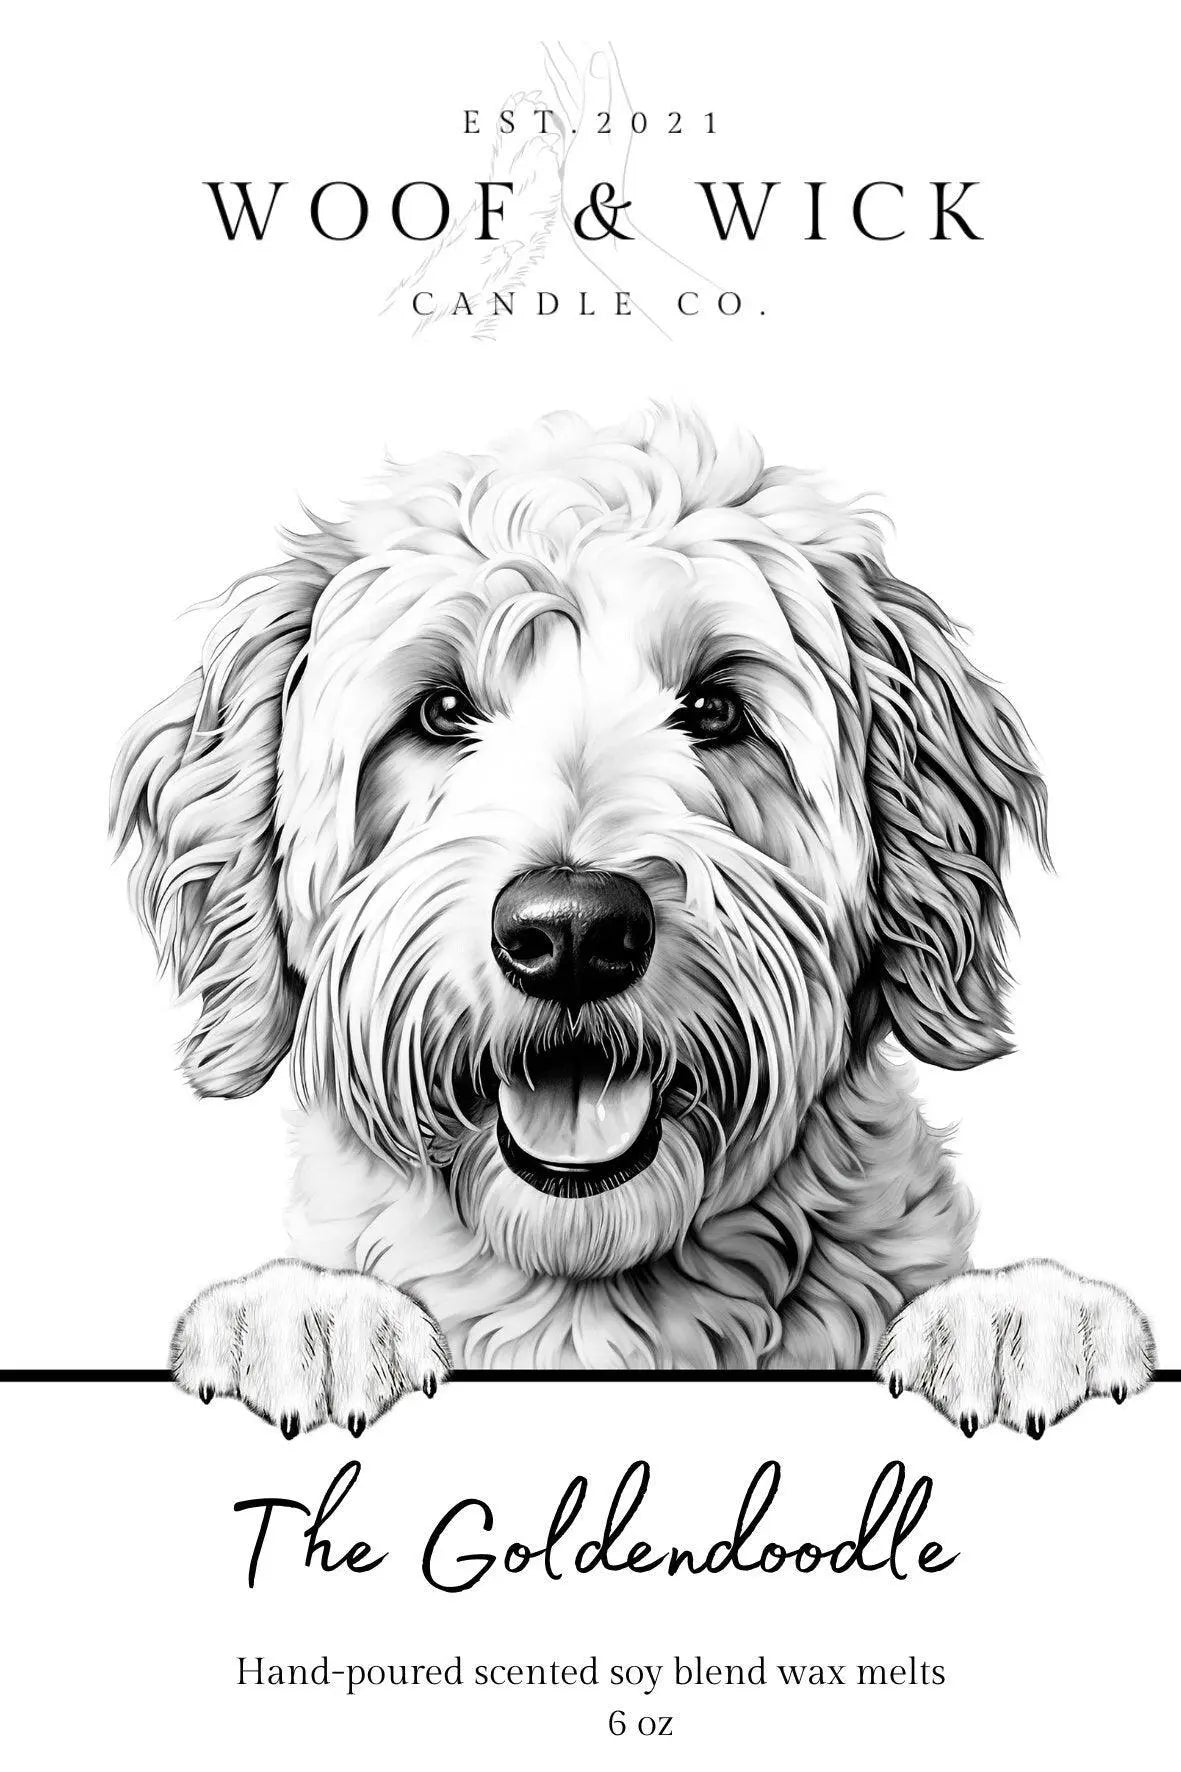 The Goldendoodle - Personalized Dog Breed Soy Wax Melts for Wax Warmers - Woof & Wick Candle Co.